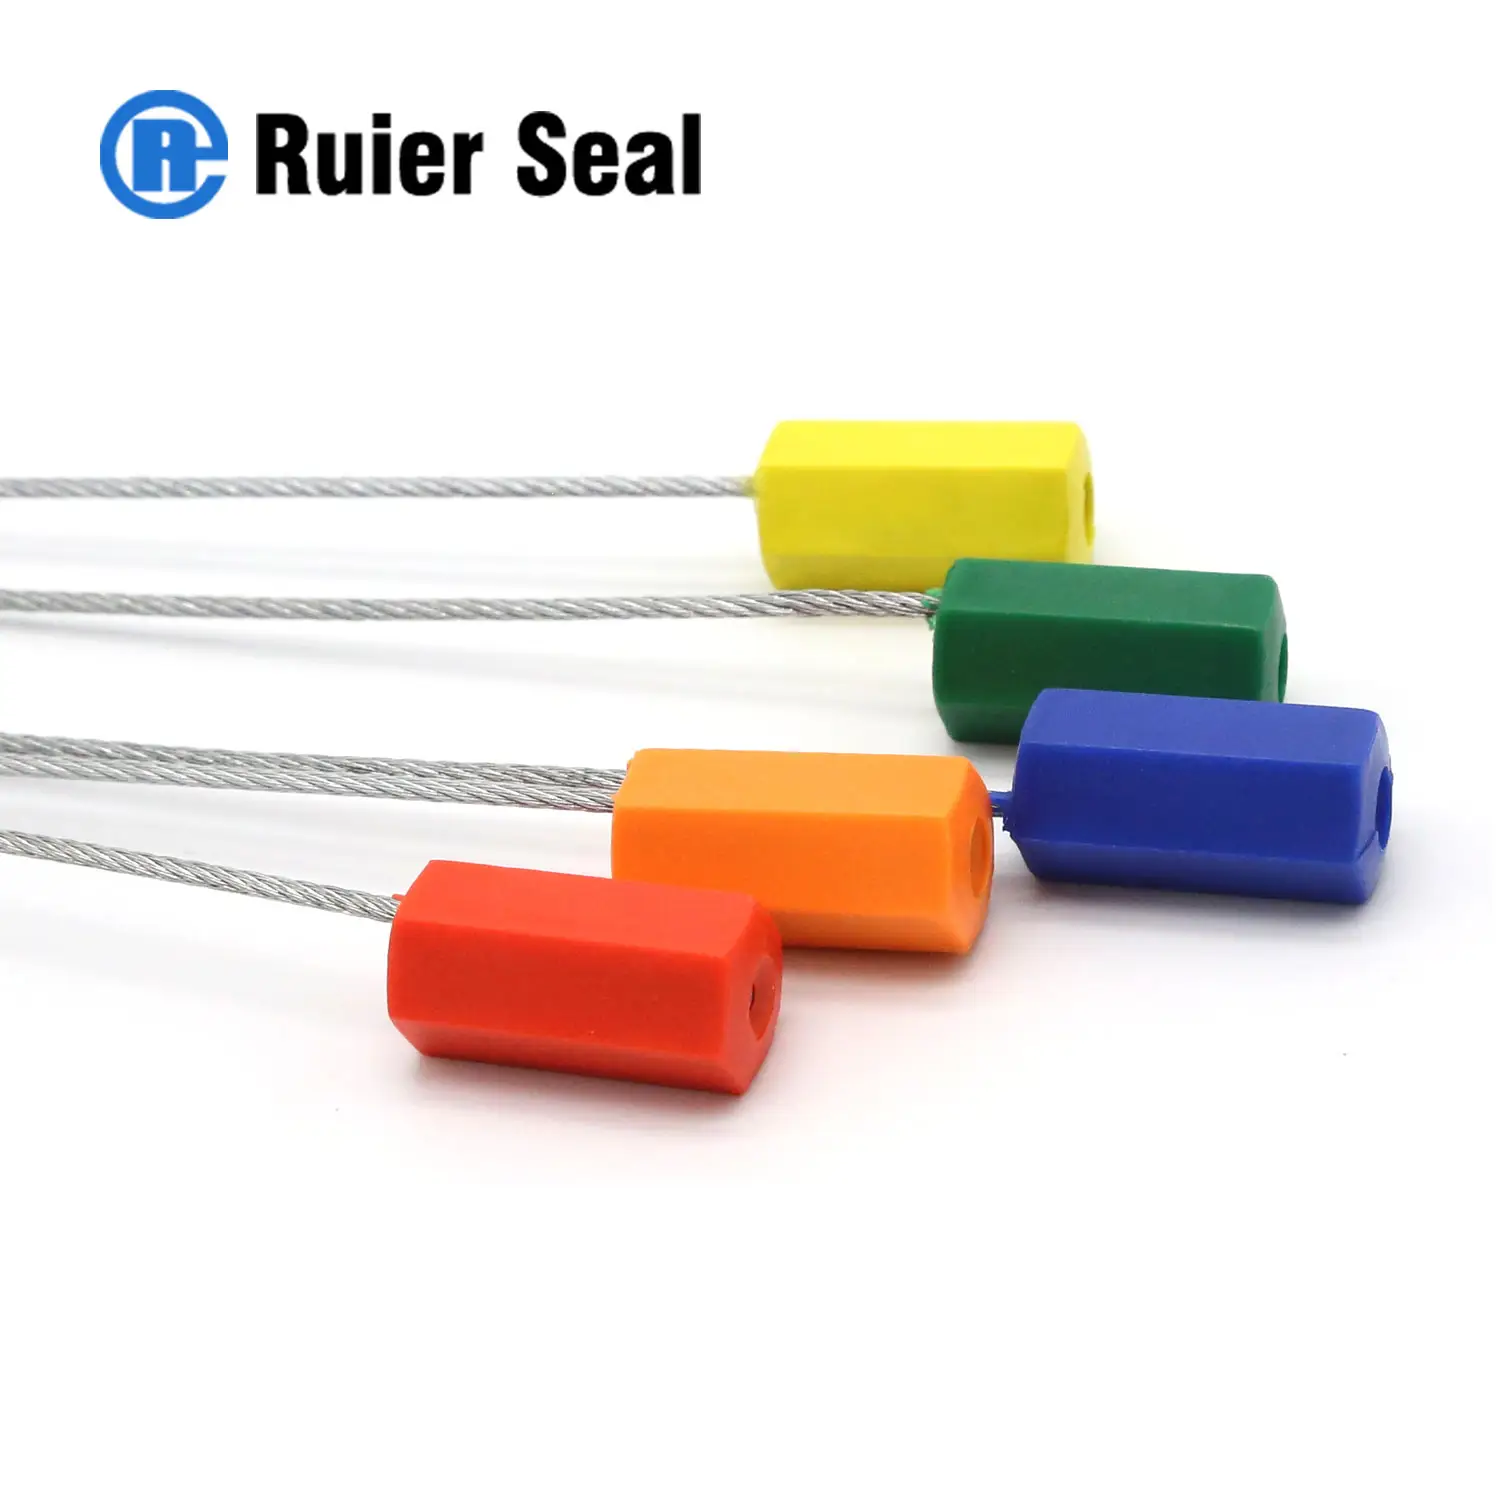 REC001 1.8mm Light Duty High Security Hexagonal Wire Cable Seal With Laser Number Printing